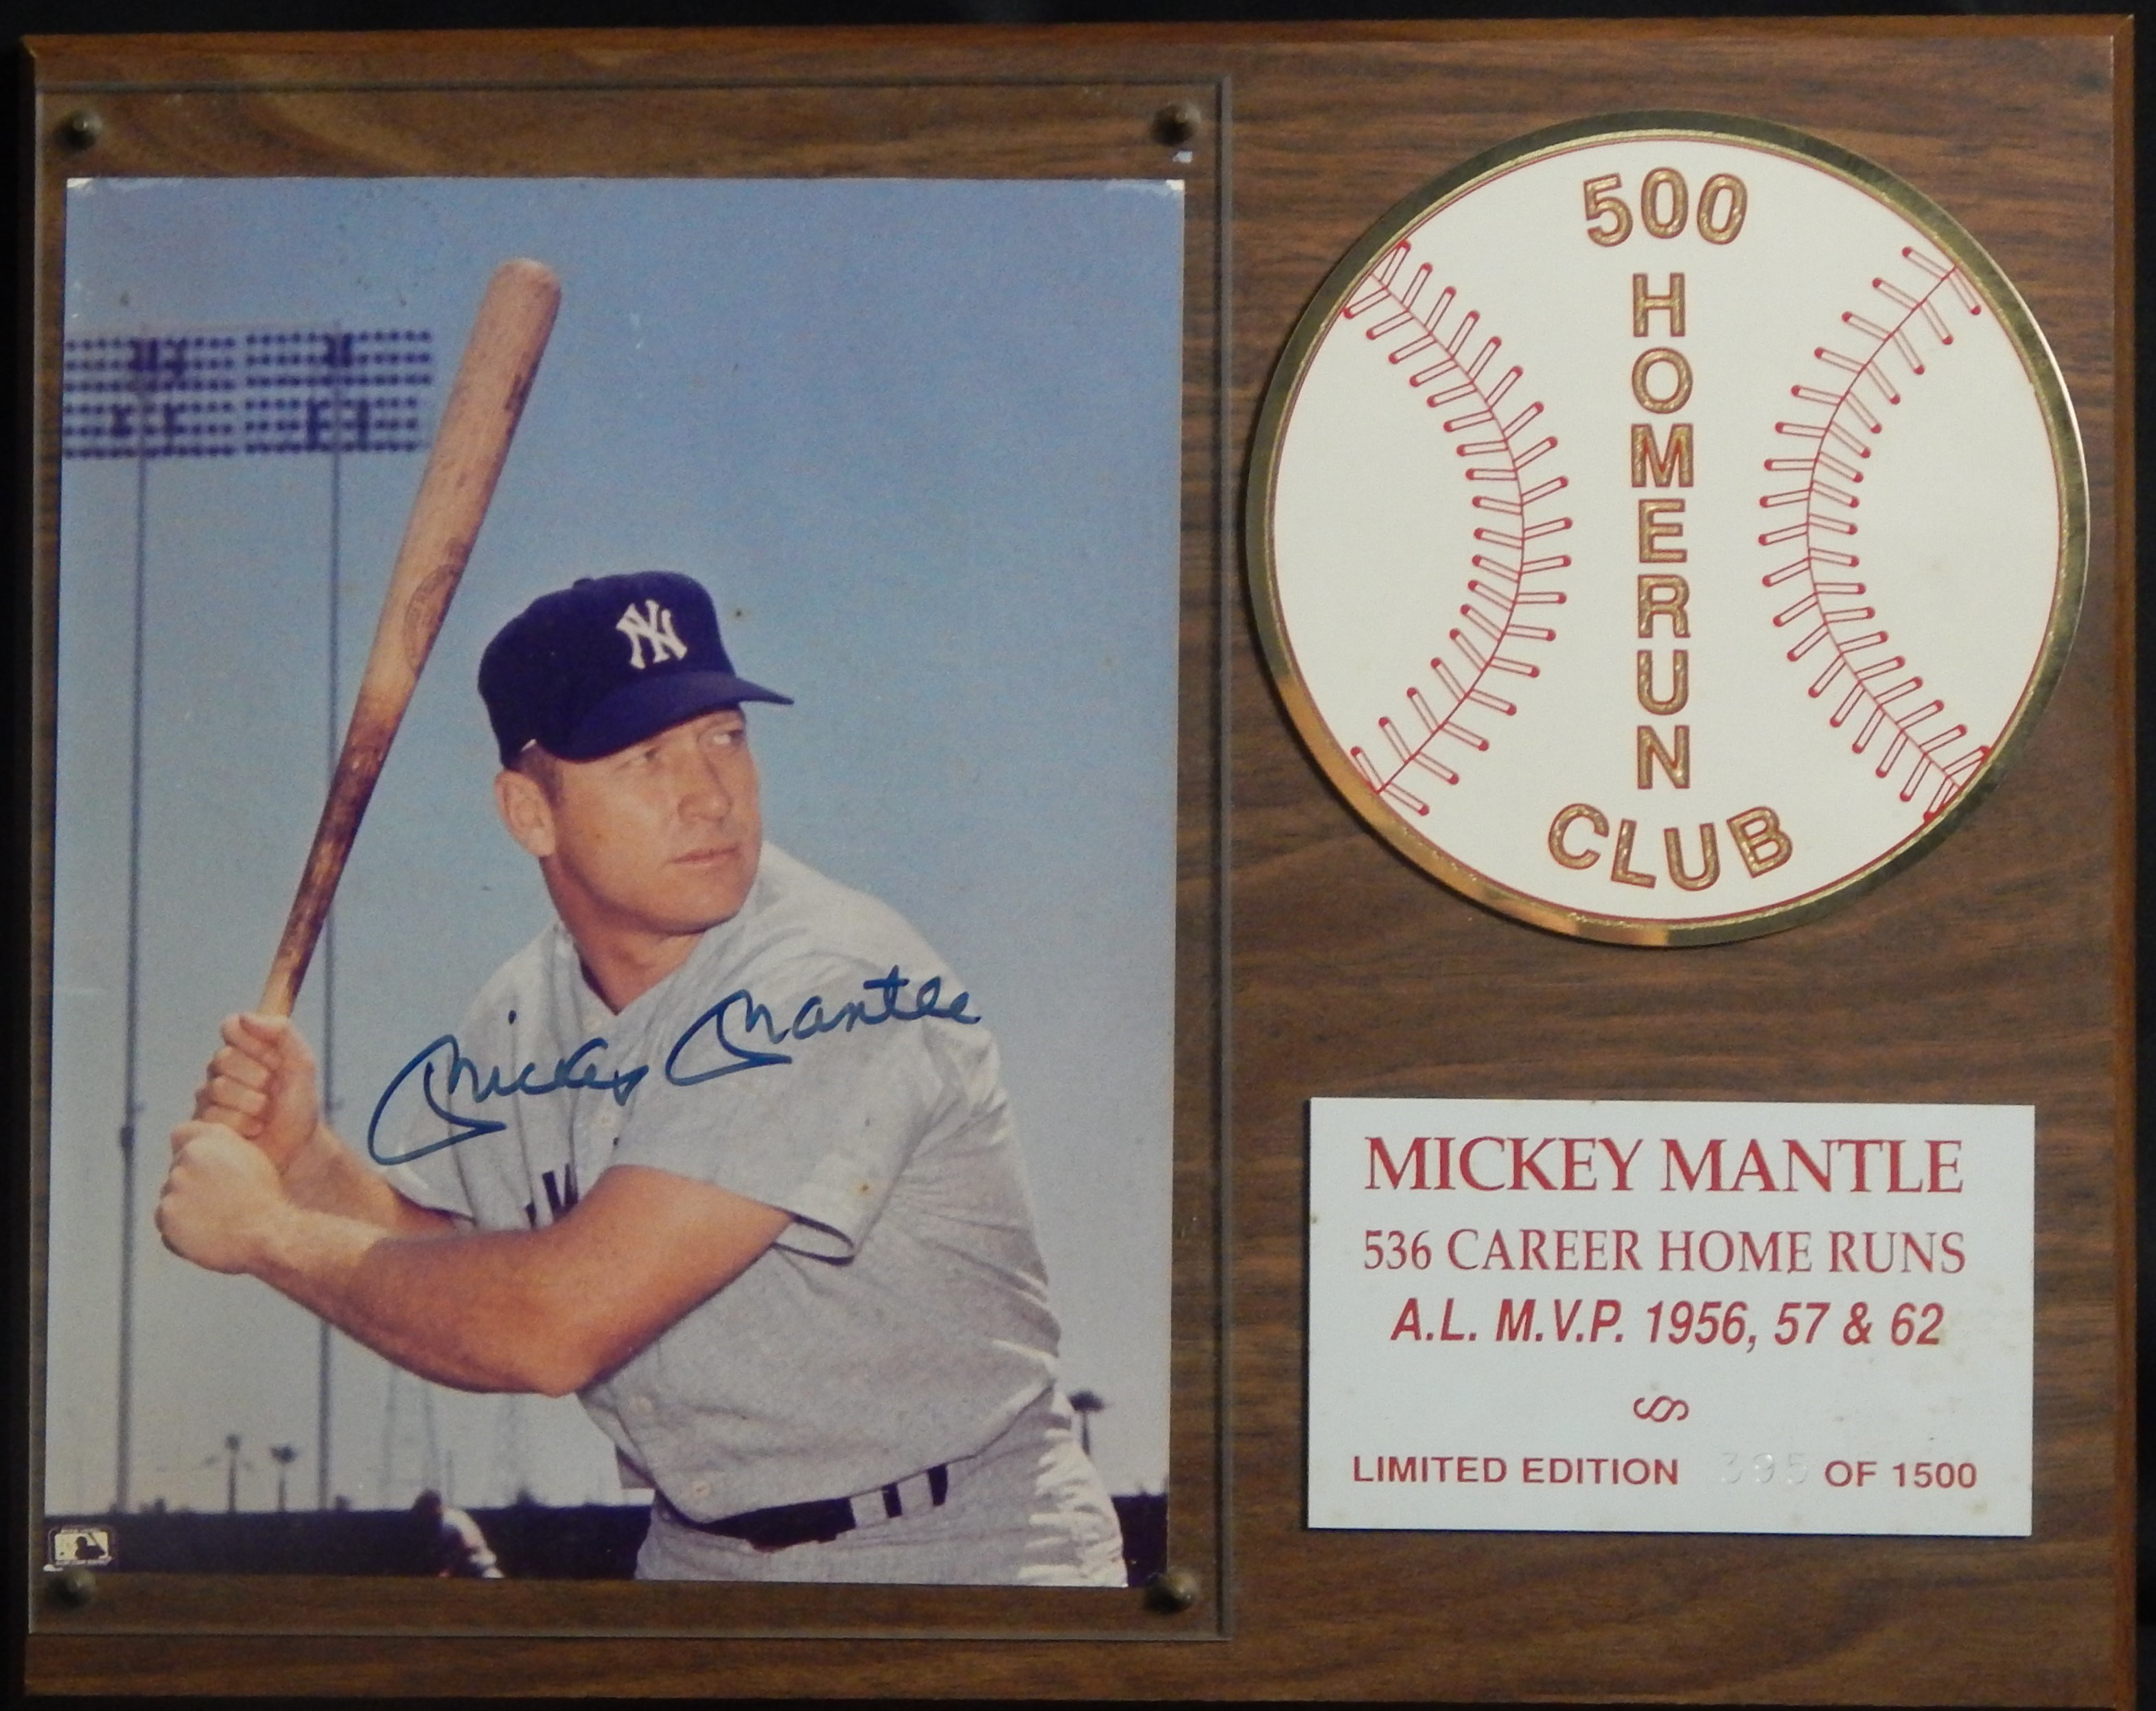 Baseball Autographs - Mickey Mantle Signed 500 HR Club Plaque